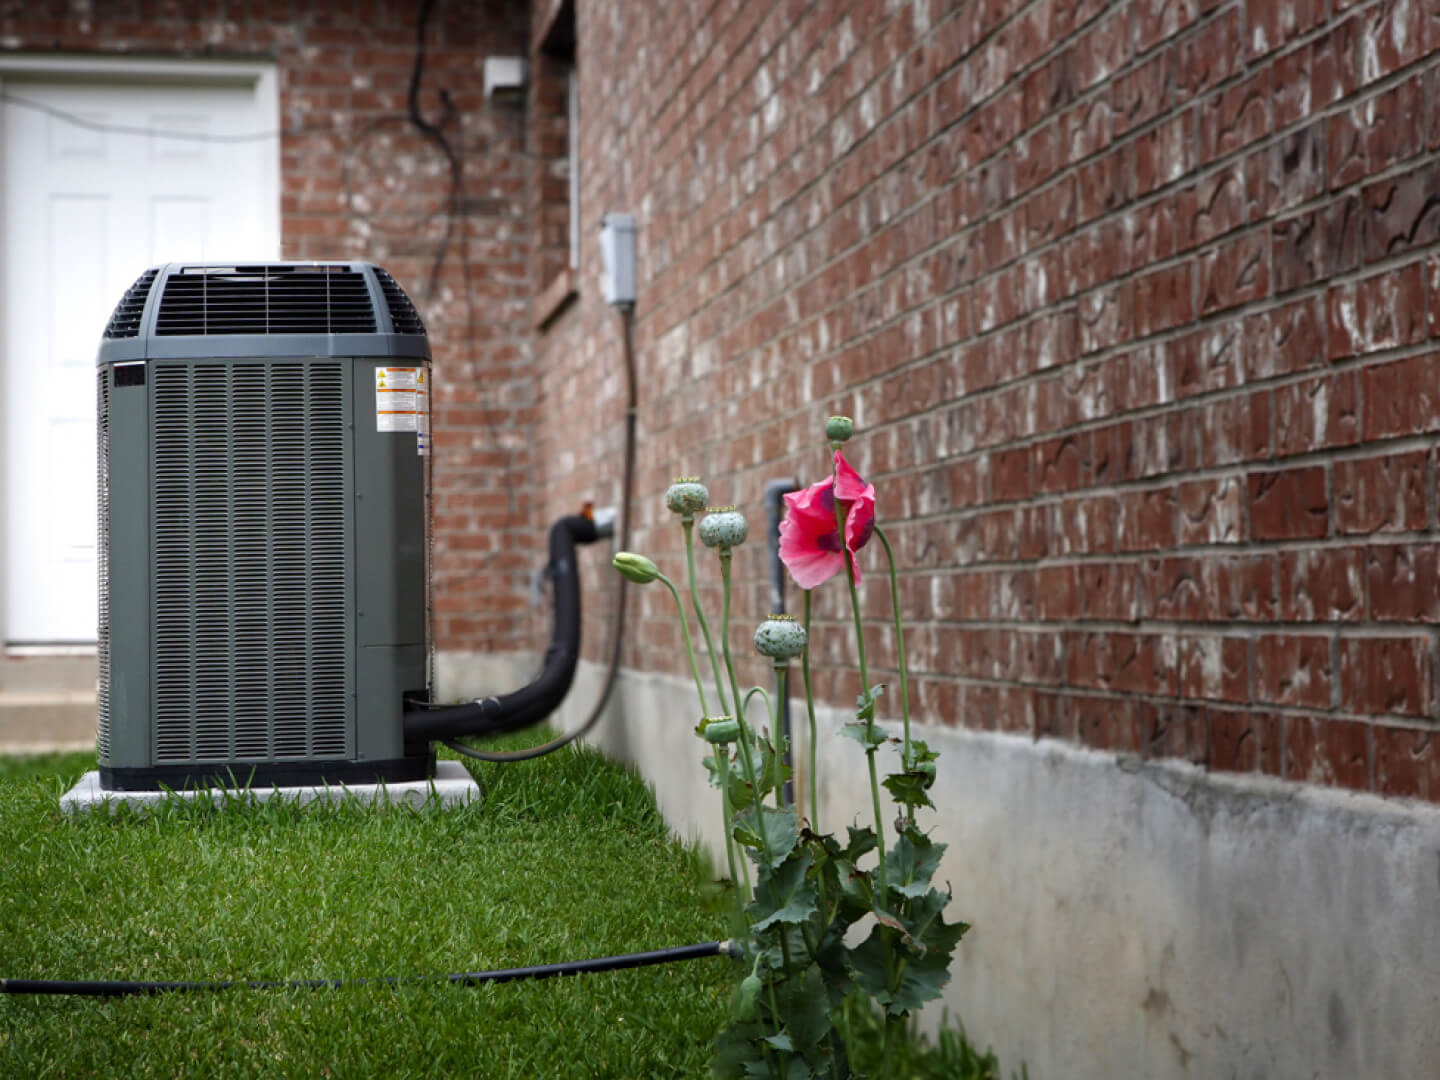 Schedule a air conditioner repair in St. Cloud MN with Augusta Plumbing & Heating.